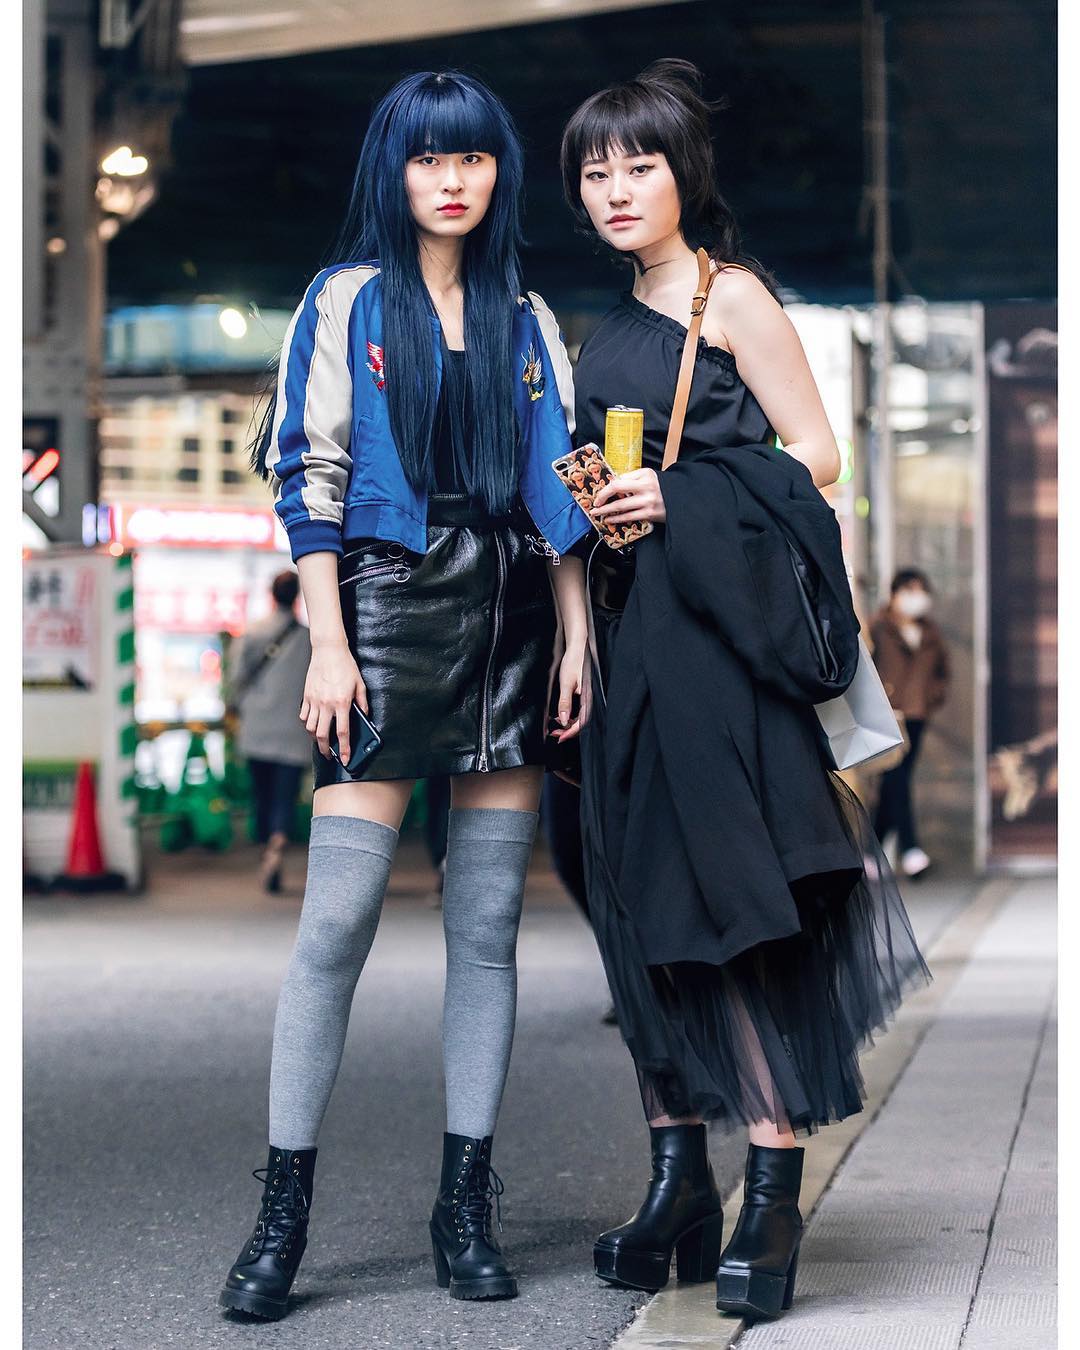 Tokyo Fashion: Tokyo Fashion Week Day 5 street snaps. Our snaps from ...